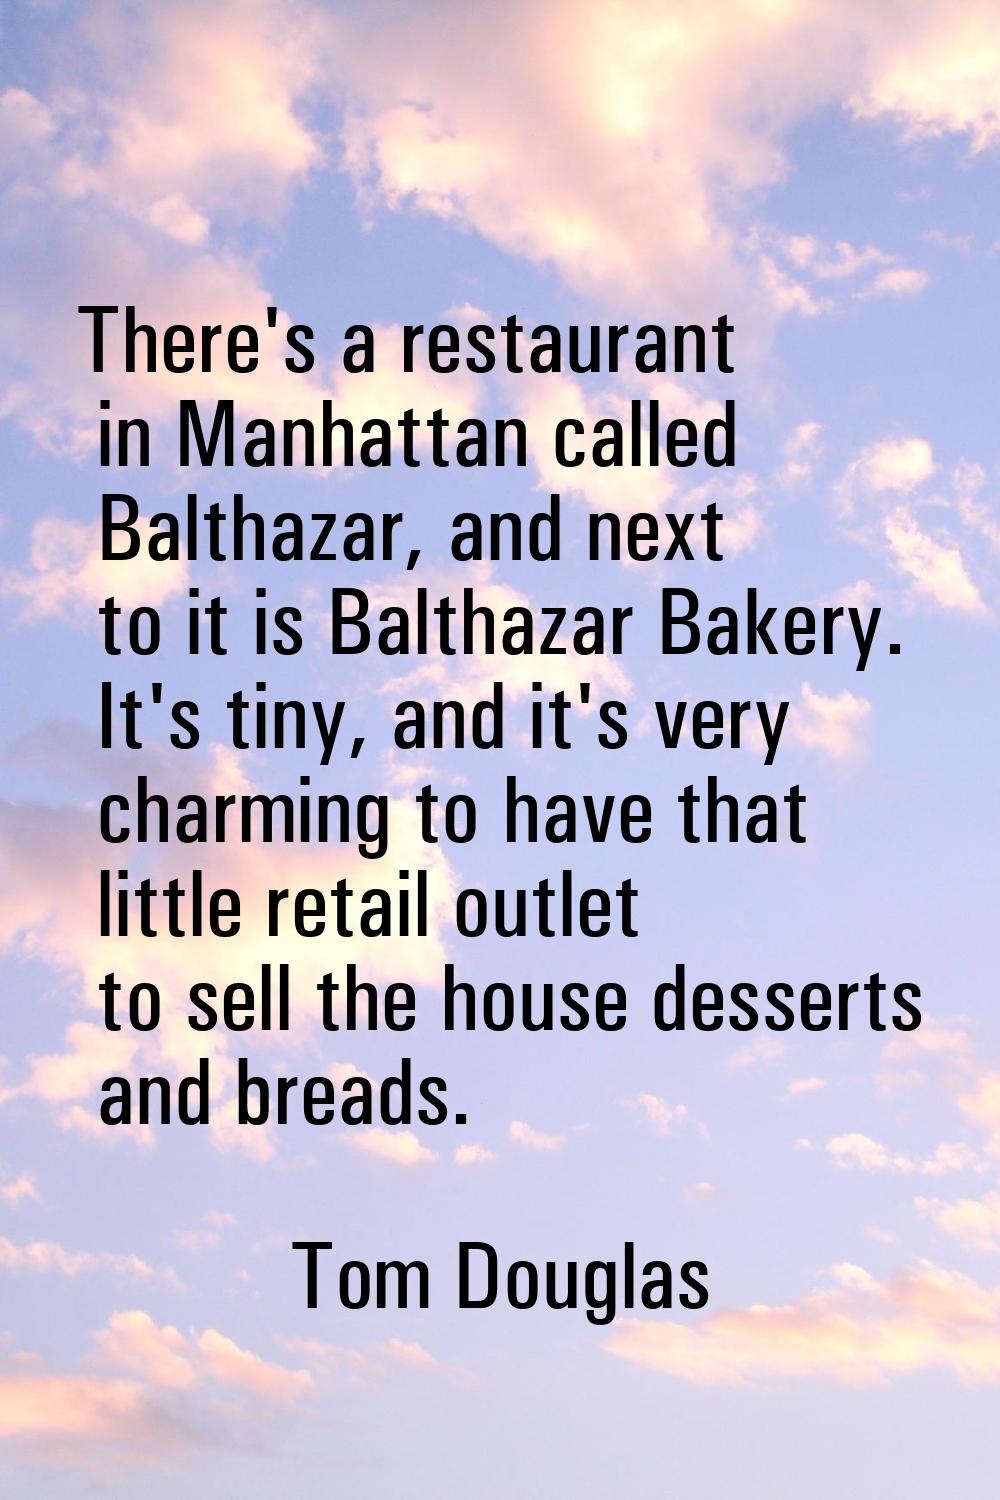 There's a restaurant in Manhattan called Balthazar, and next to it is Balthazar Bakery. It's tiny, 